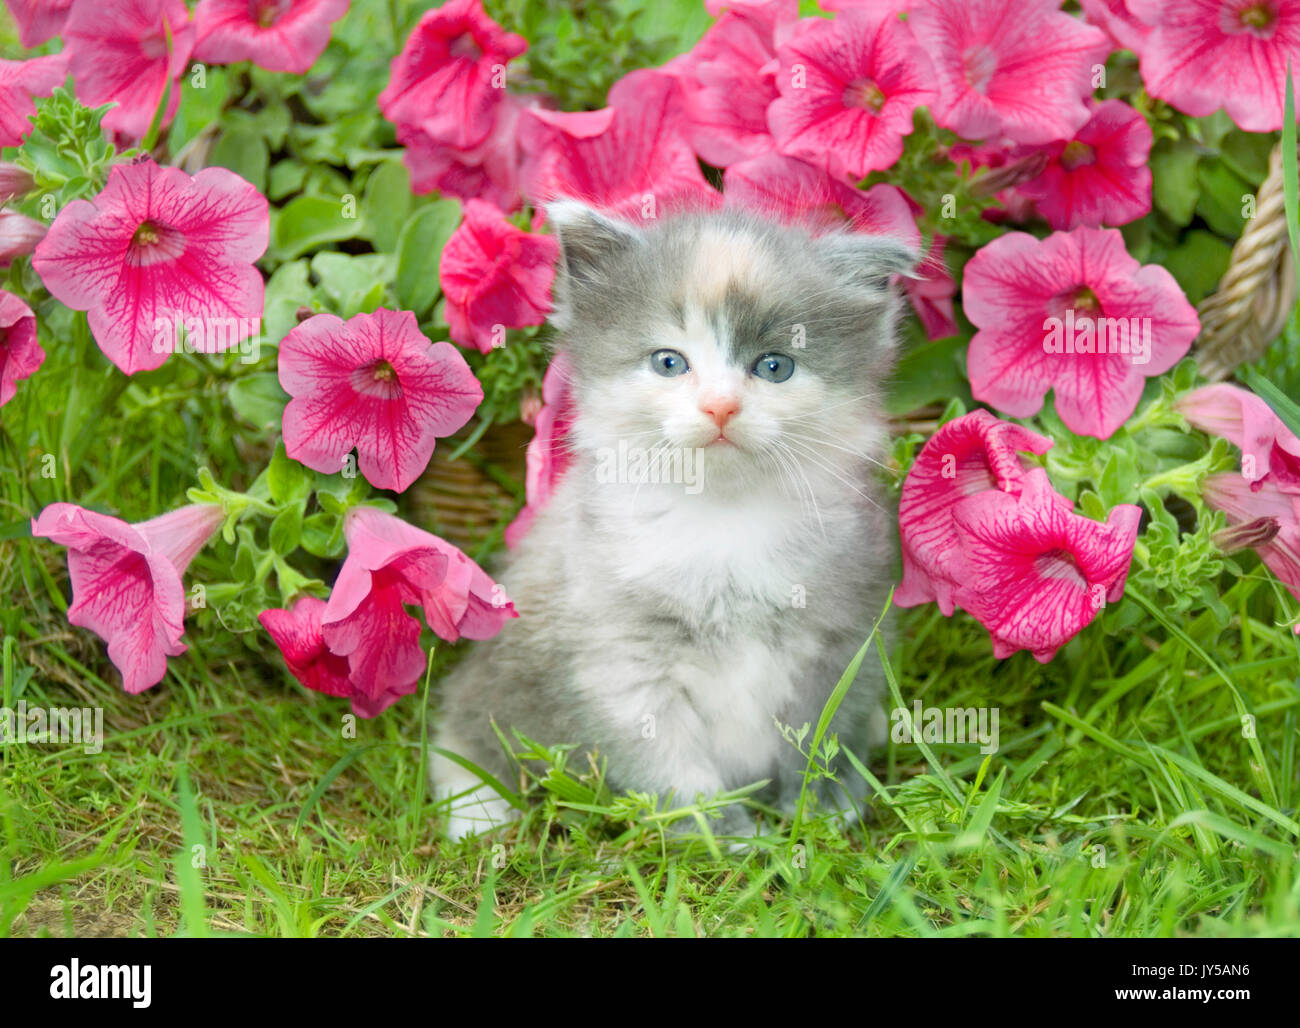 Young small cat in the flowers outdoor Stock Photo